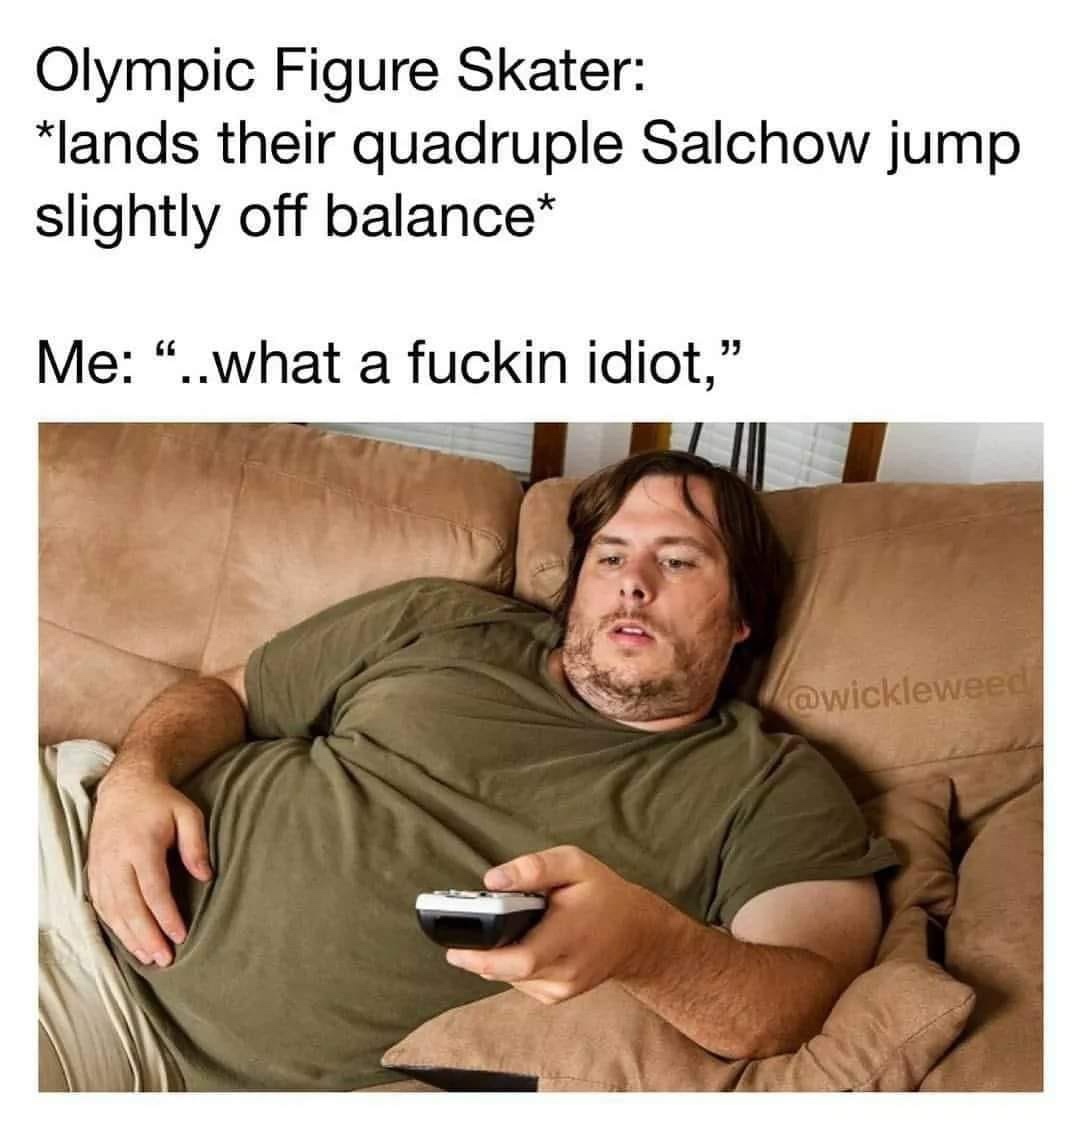 me watching the olympics meme - Olympic Figure Skater lands their quadruple Salchow jump slightly off balance Me ..what a fuckin idiot,"